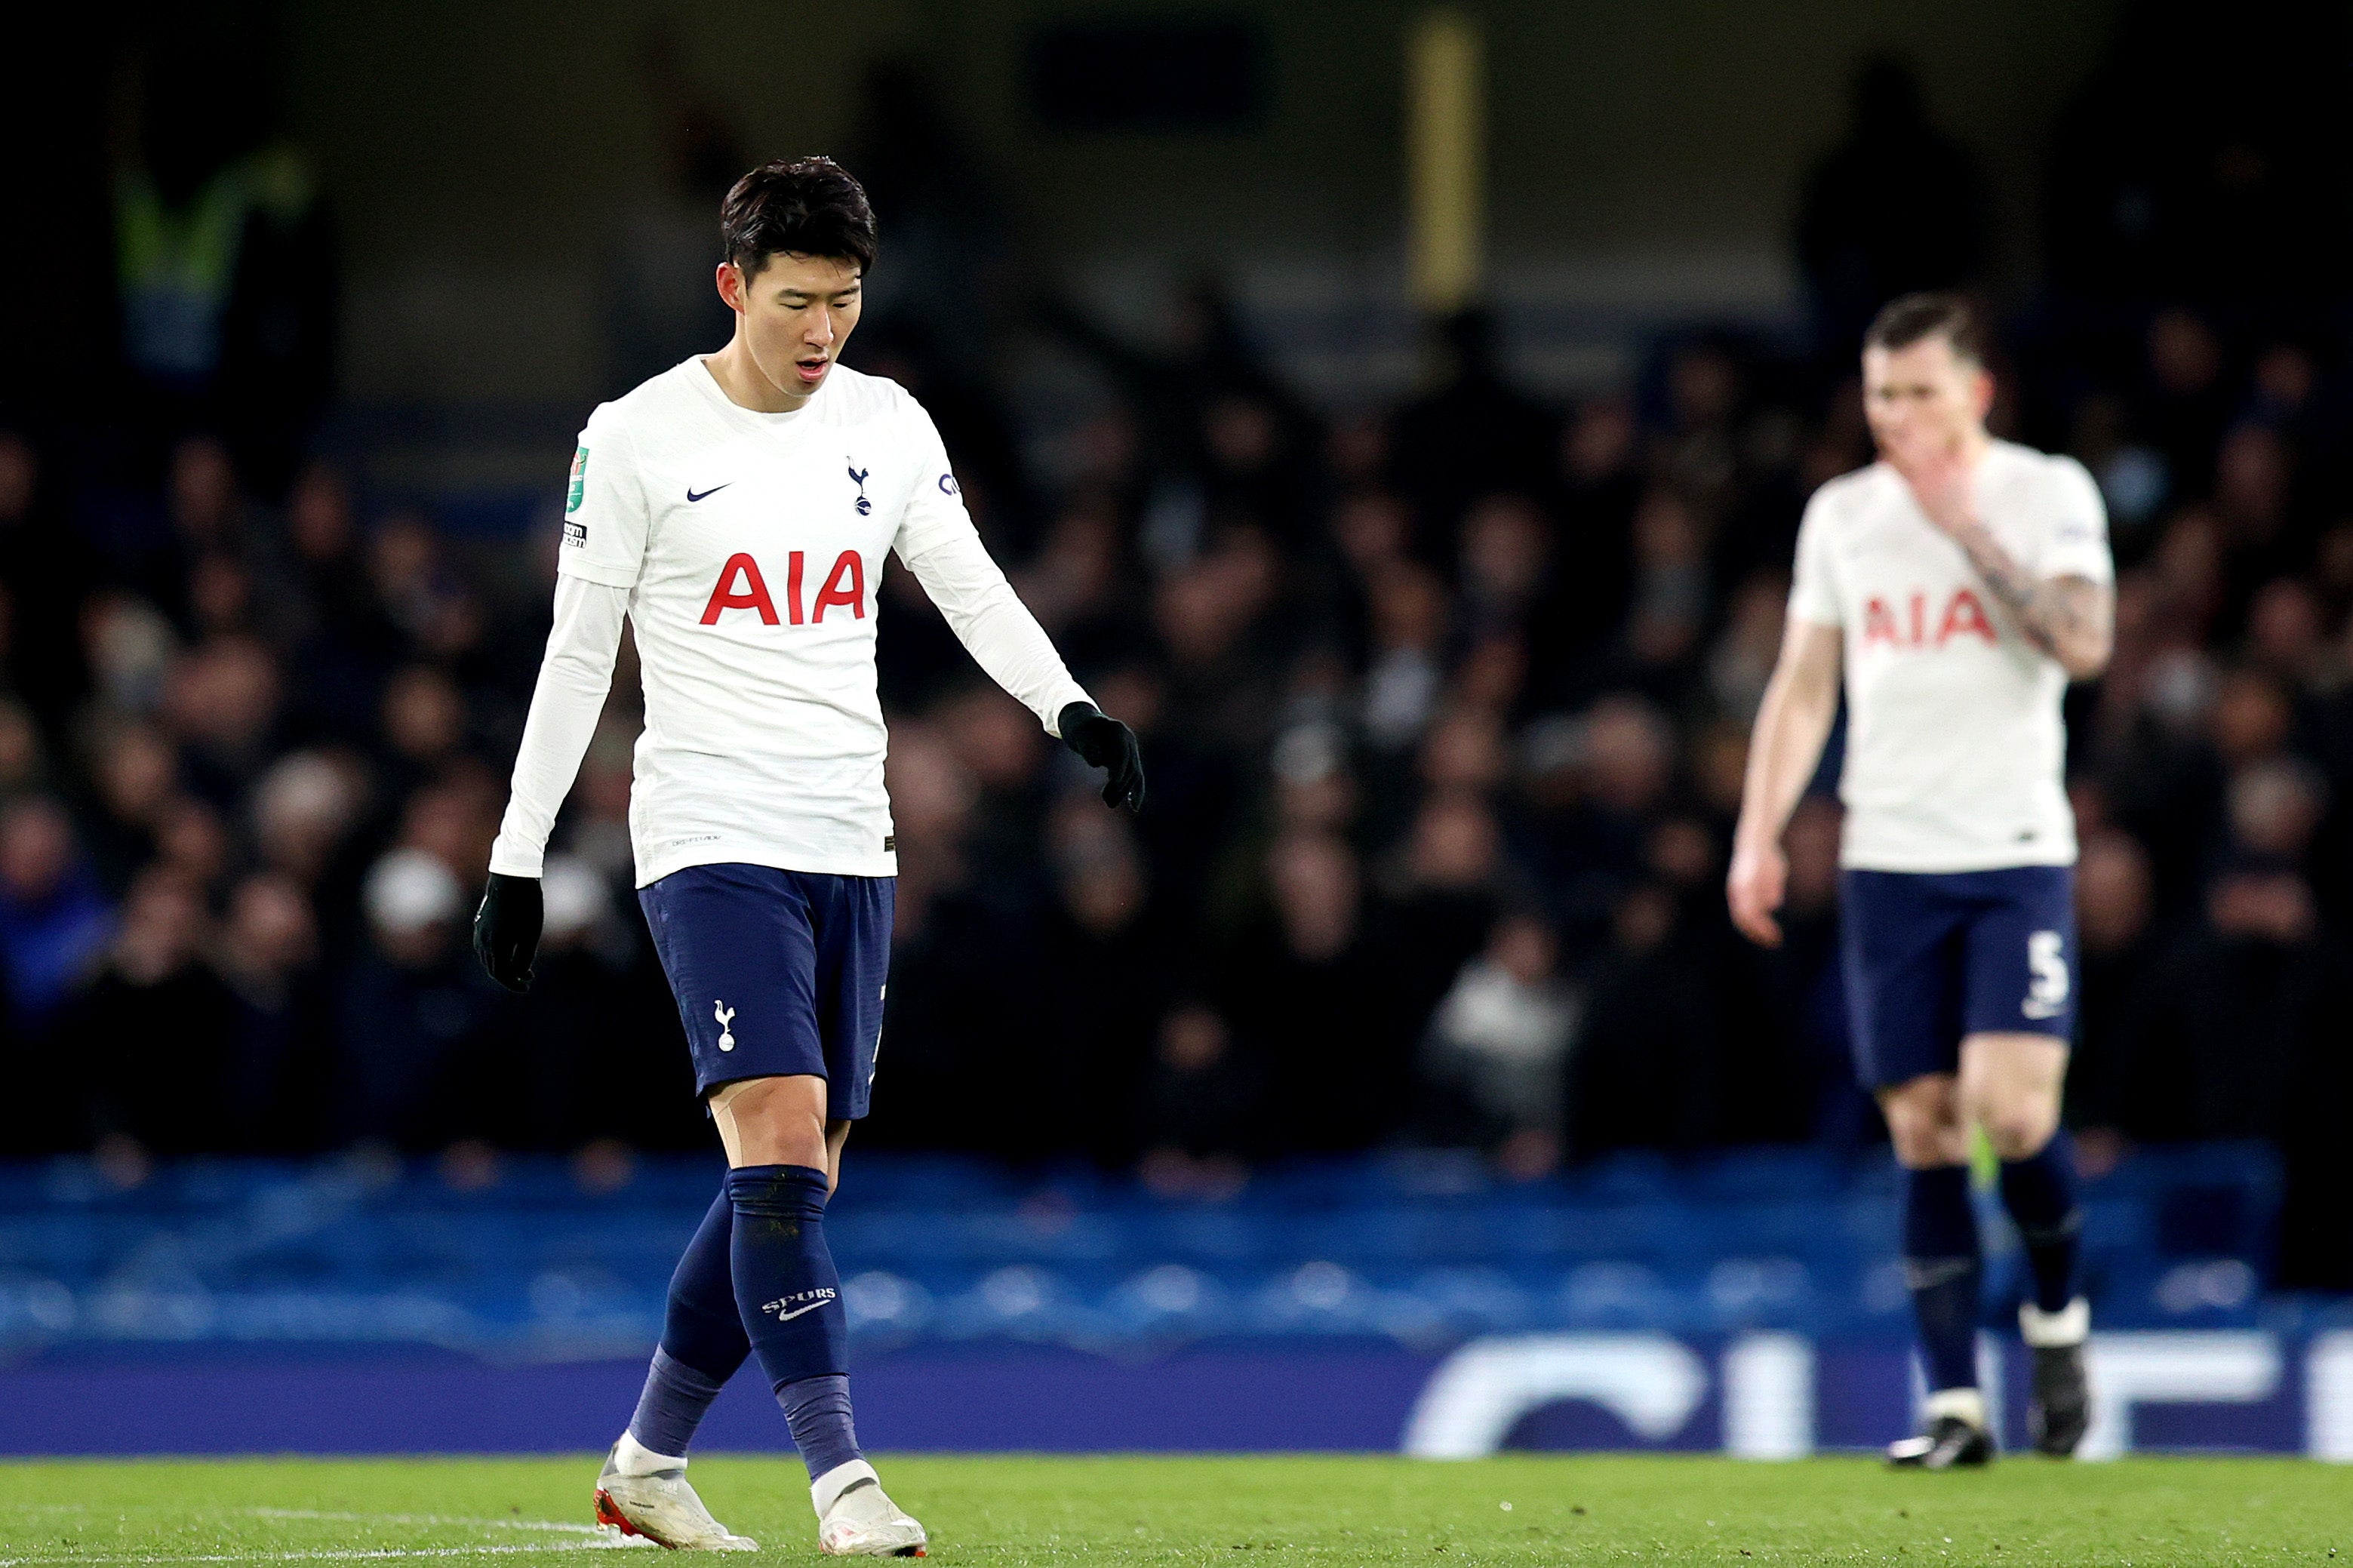 Son Heung-min injured his calf against Chelsea